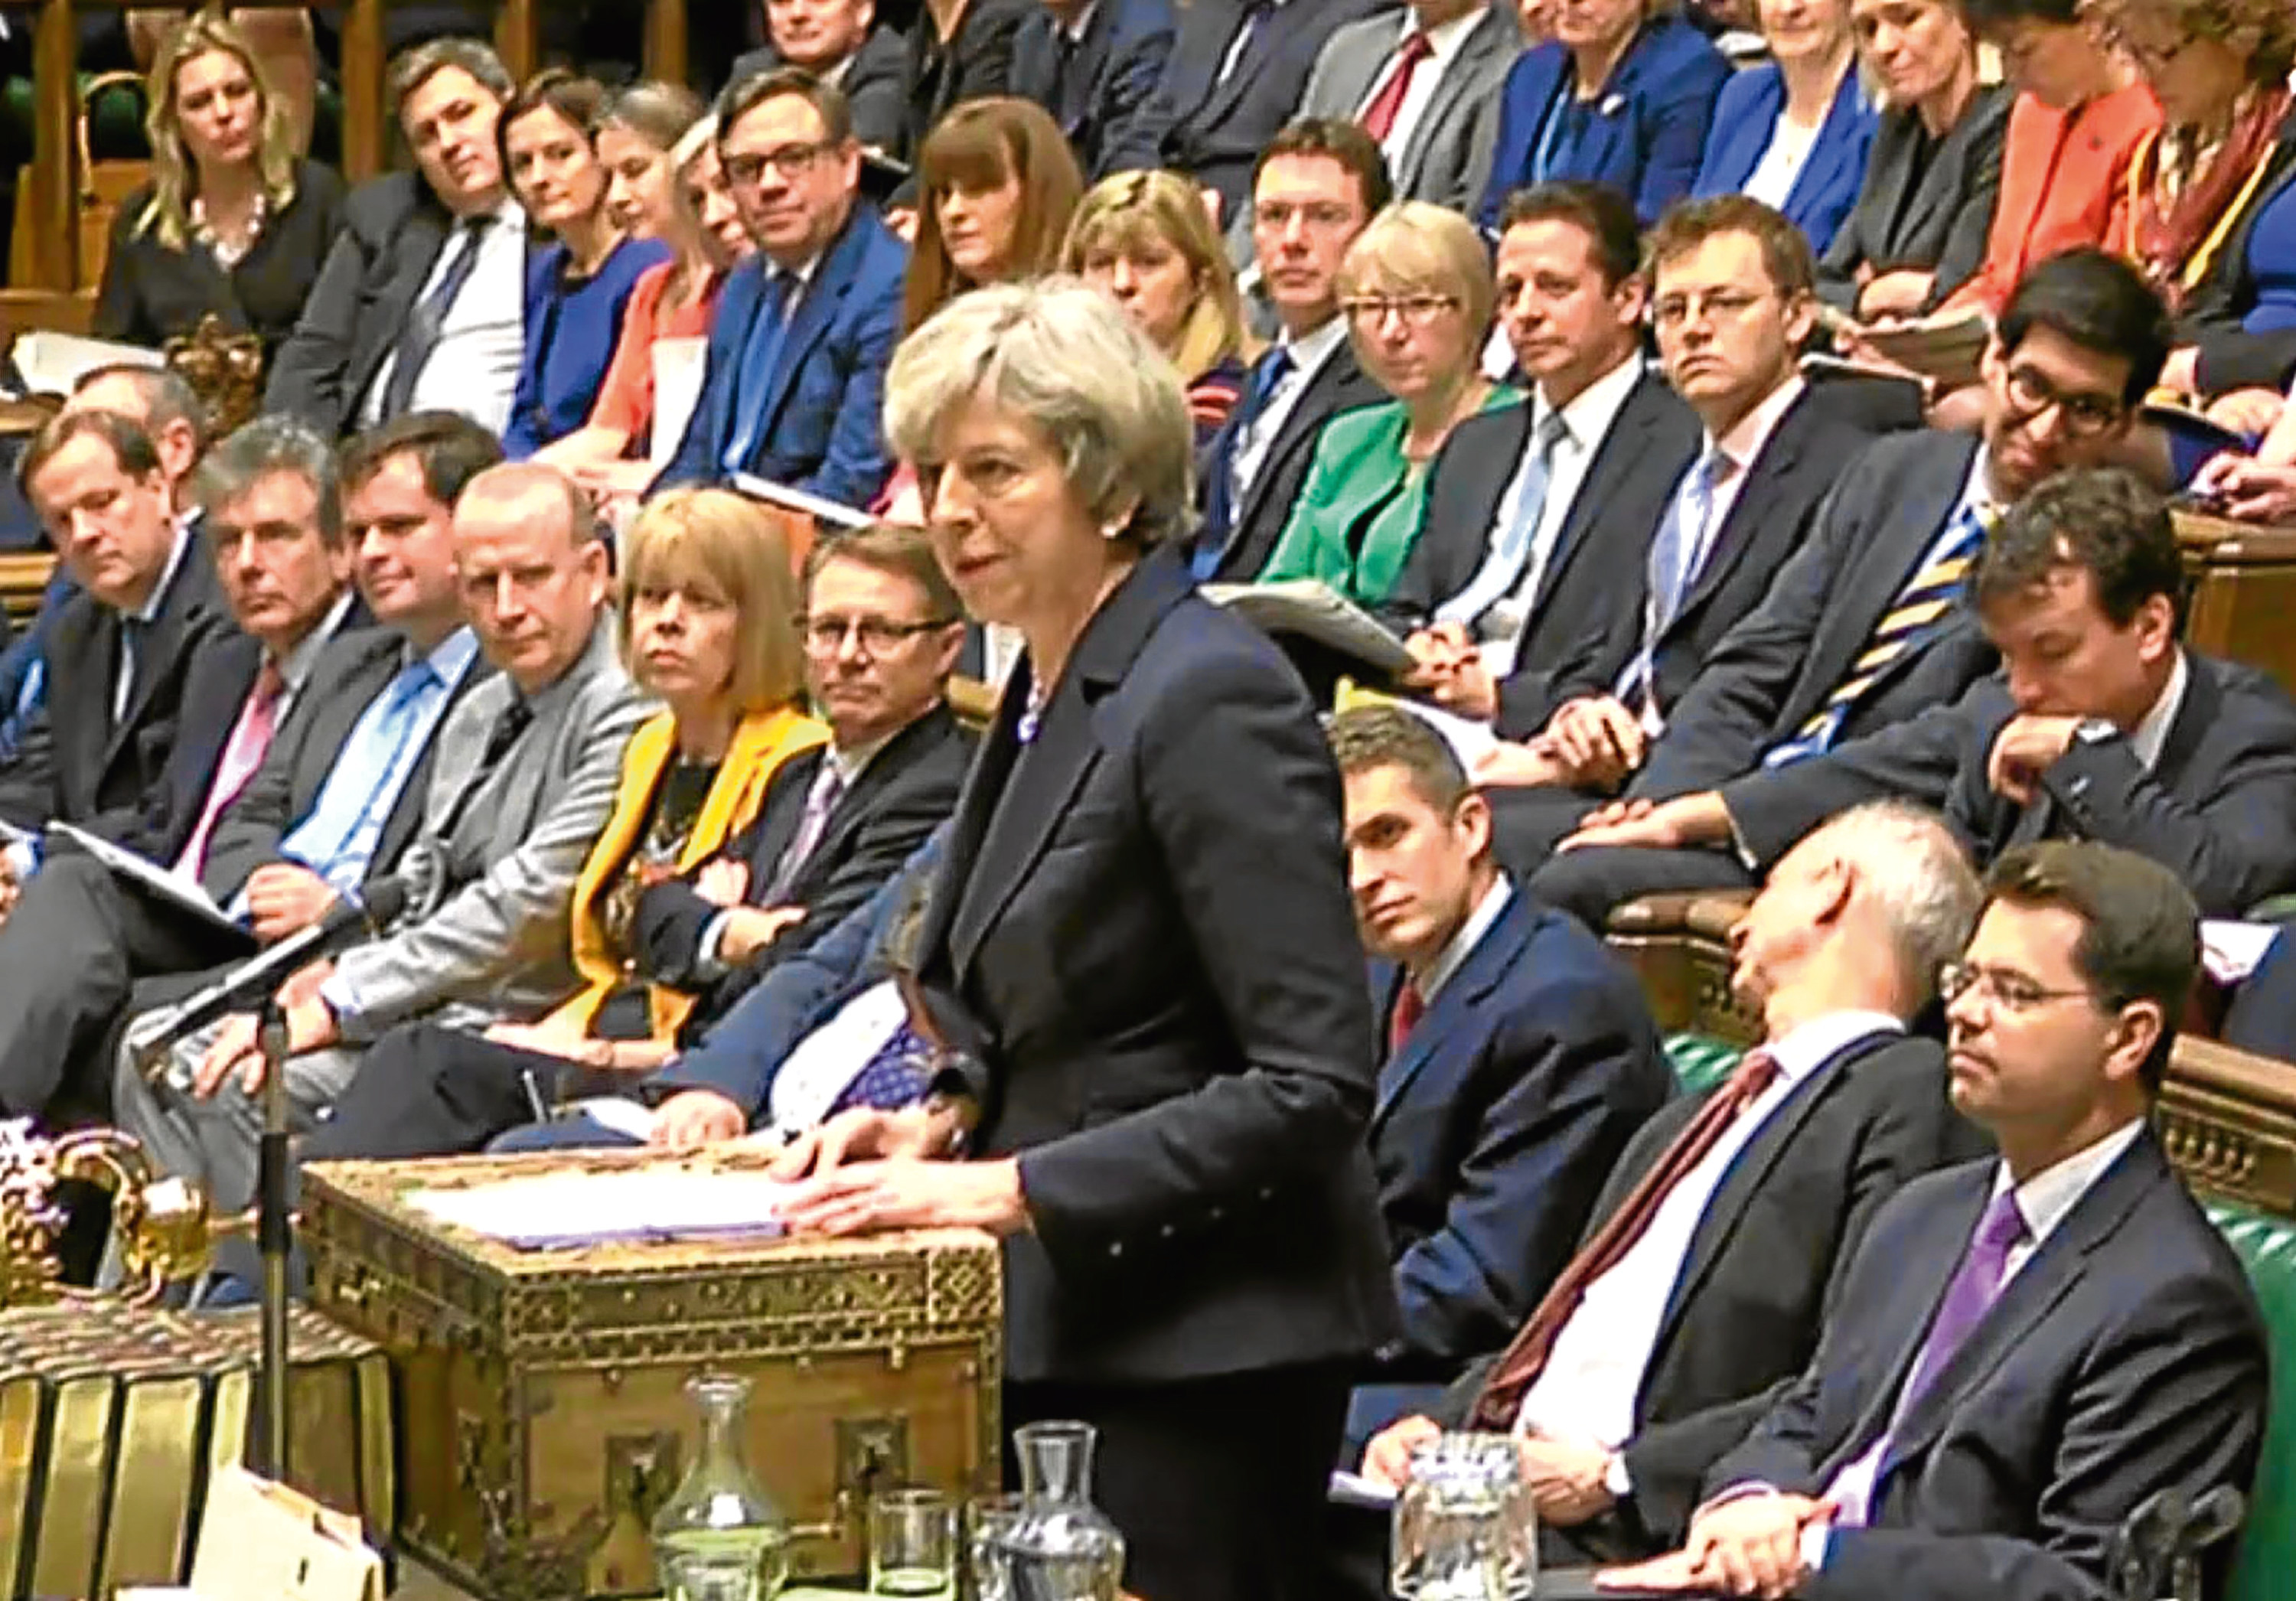 Prime Minister Theresa May speaks during Prime Minister's Questions in the House of Commons, London. (PA Wire)